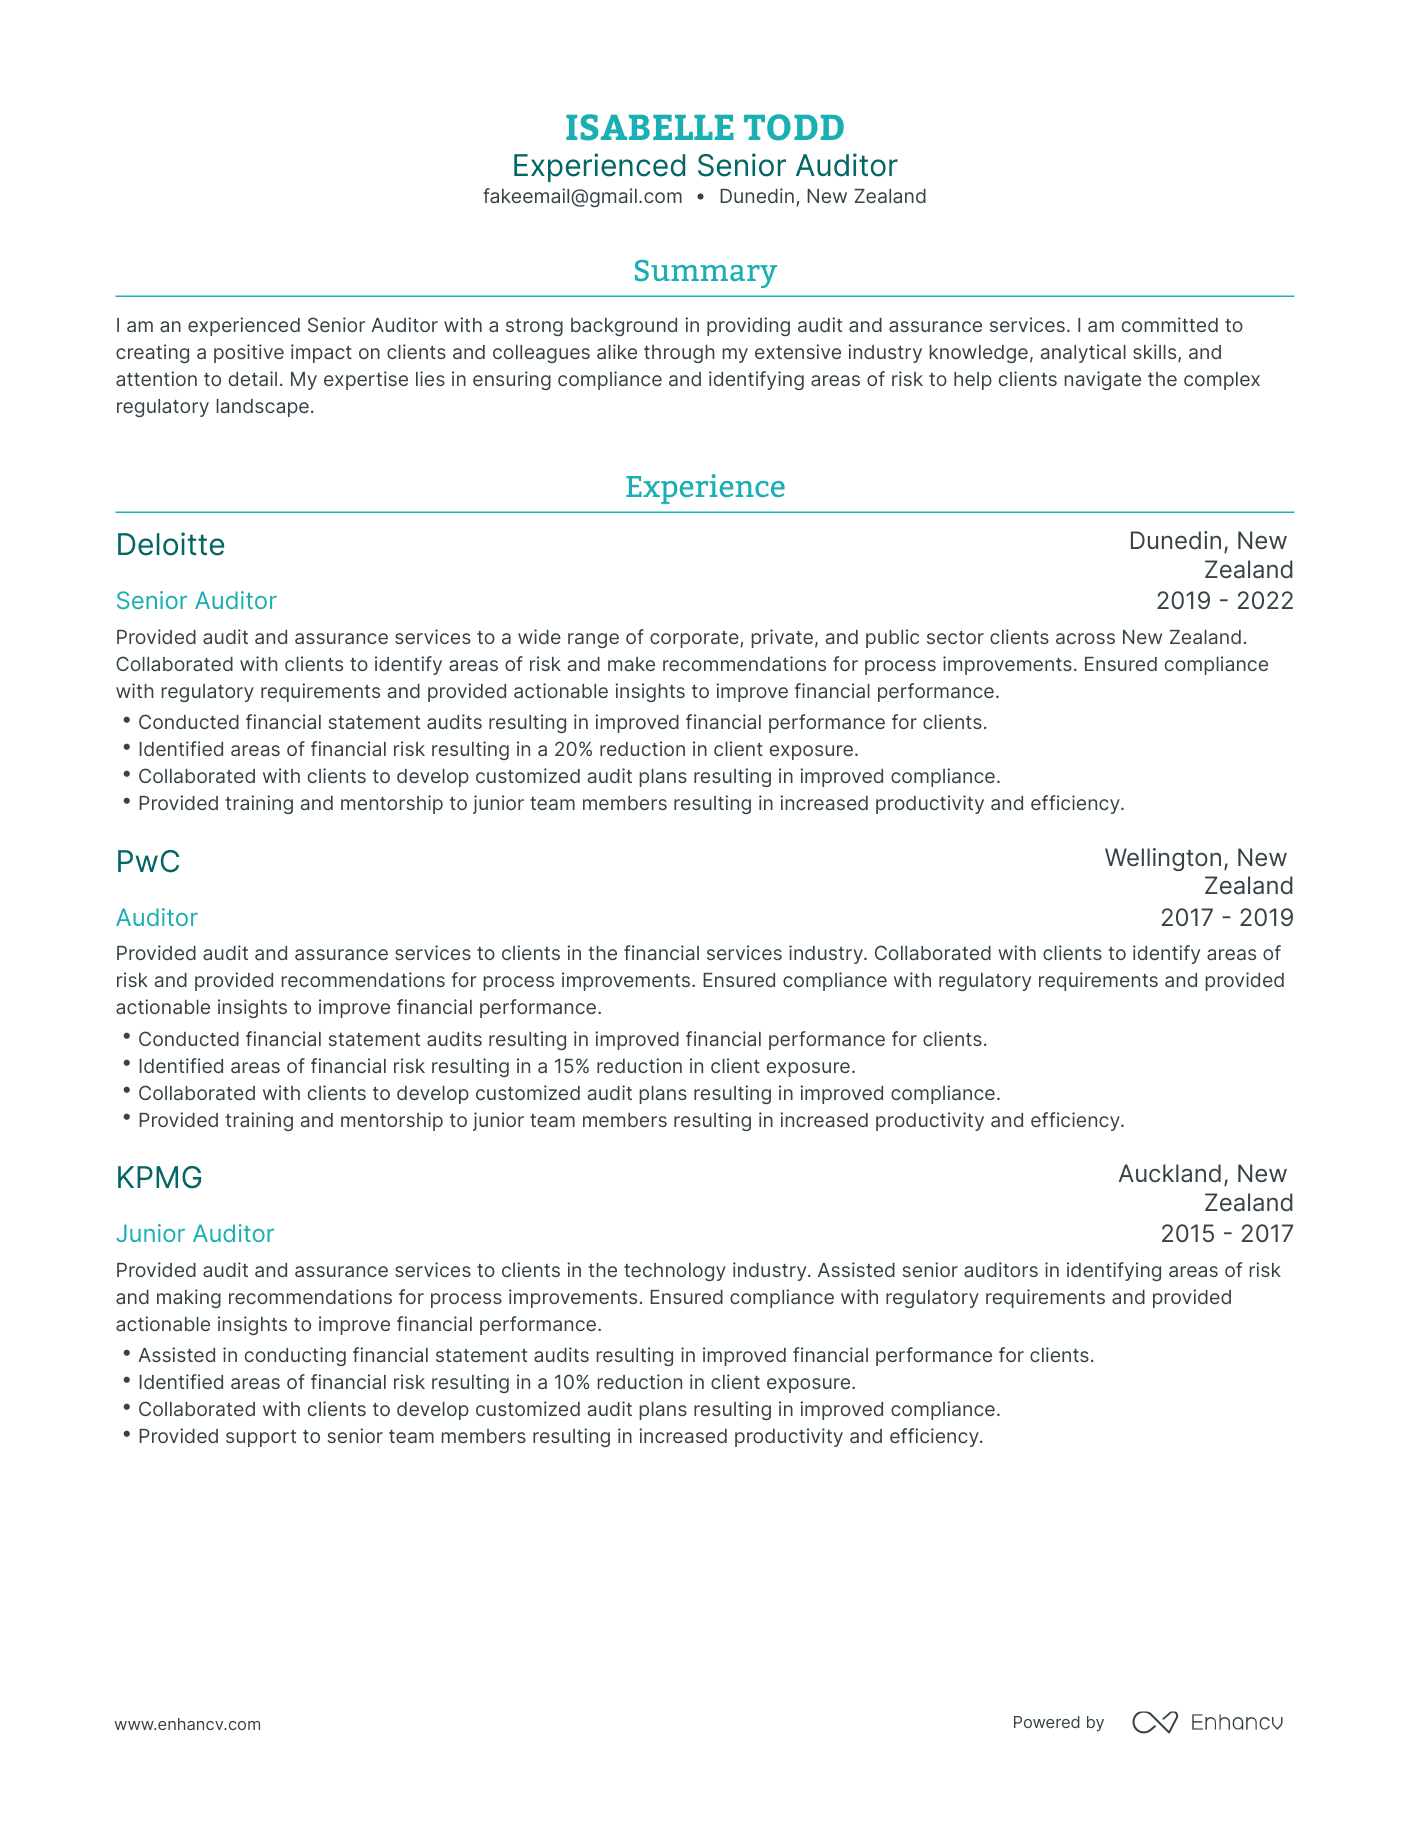 Traditional Public Accounting Auditor Resume Template